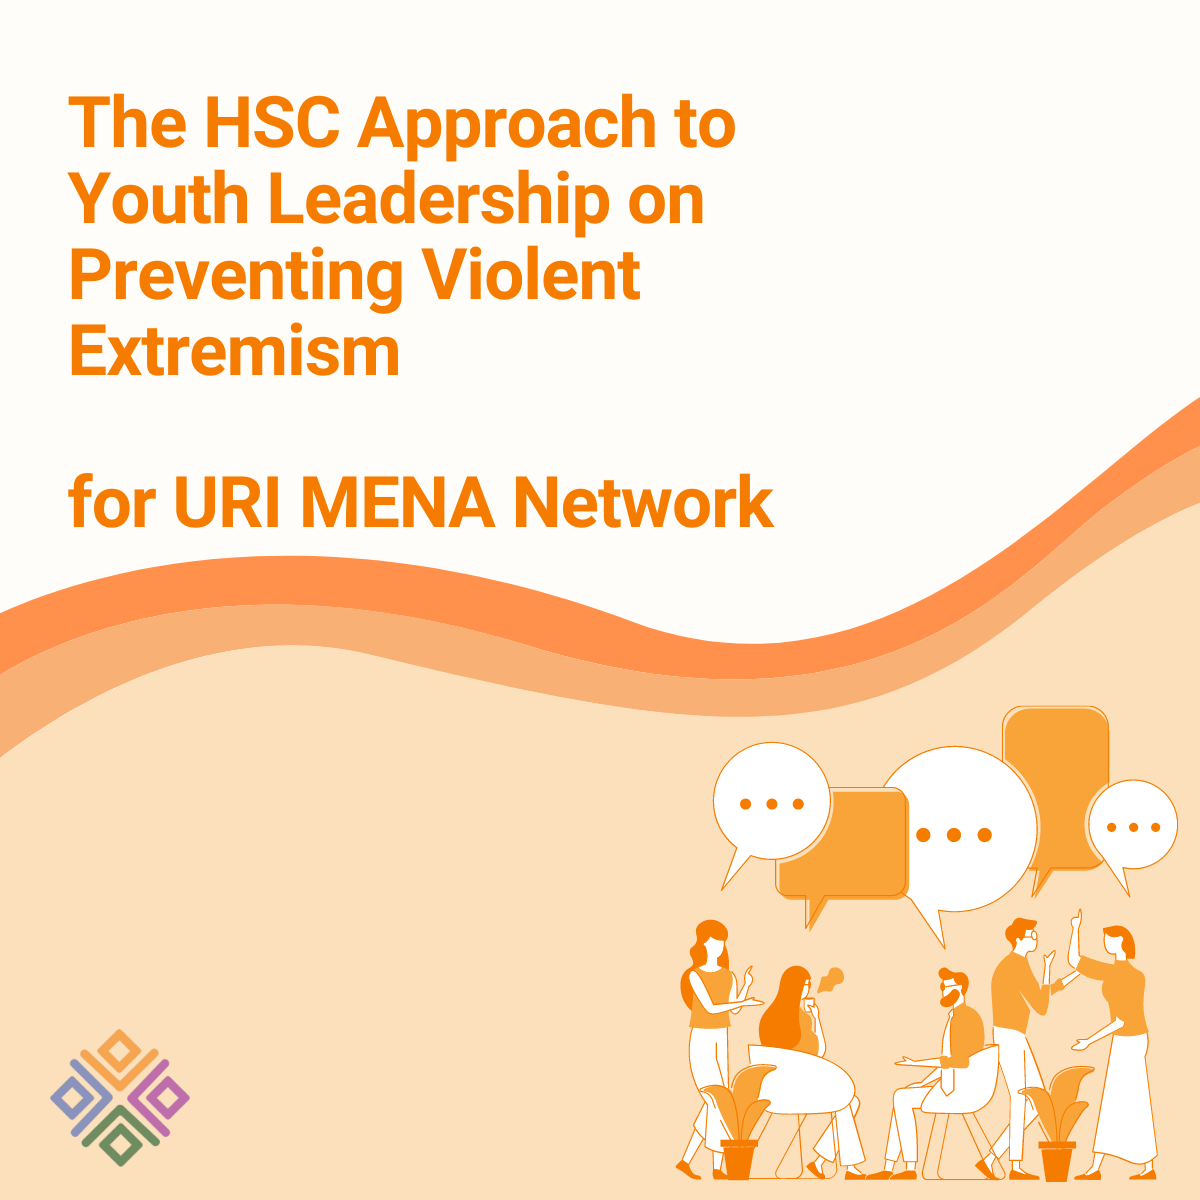 January 2022 – HSC Leadership Approach of PVE